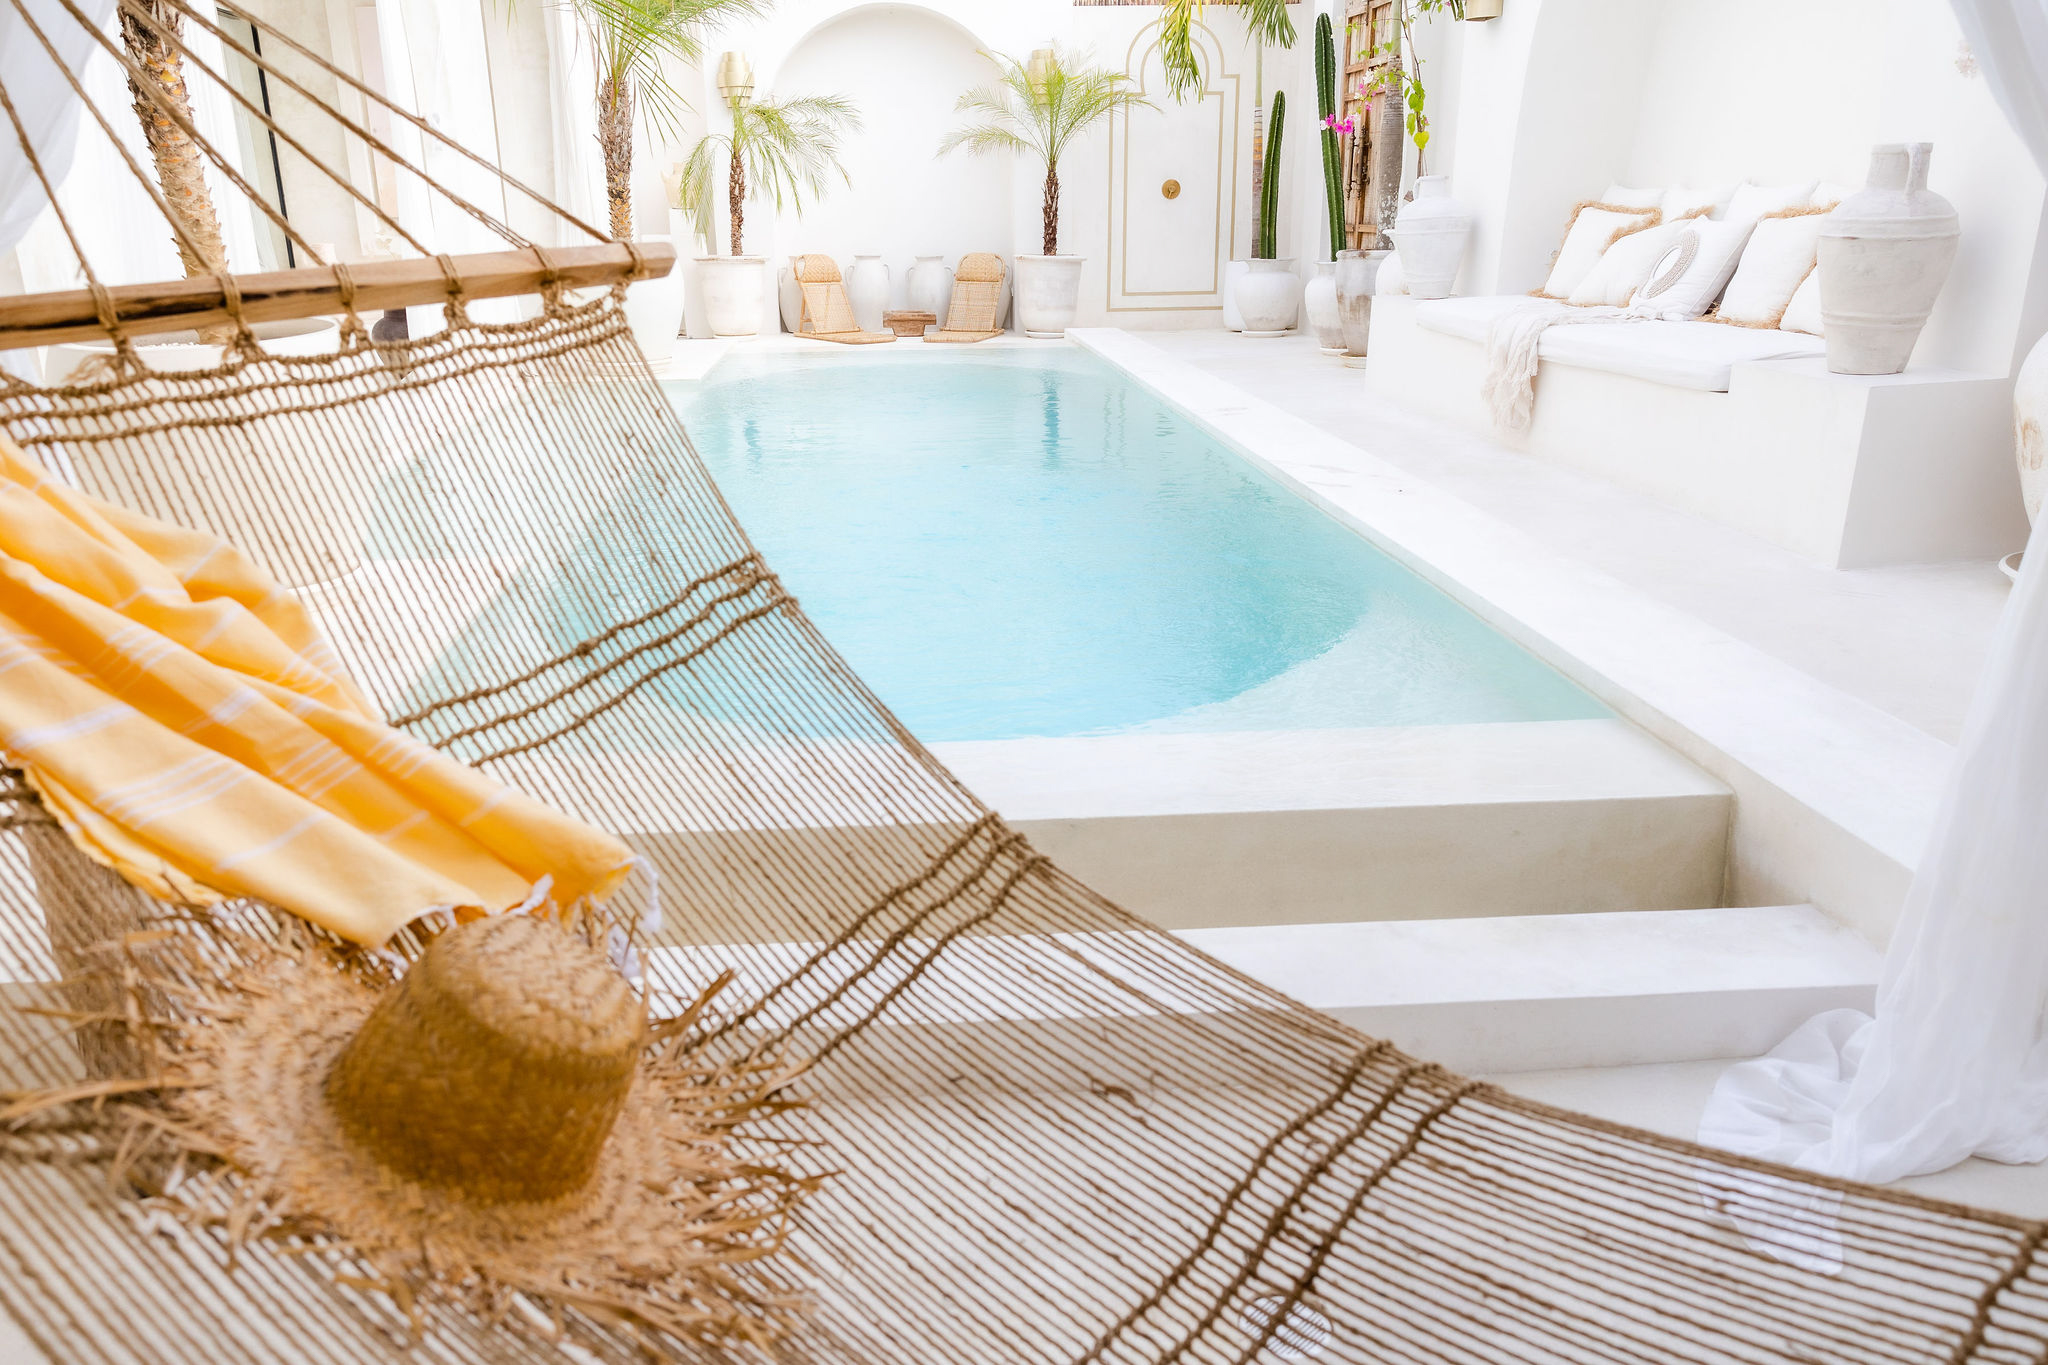 Travel and lifestyle stock images featuring outdoor living area in a Bali villa with swimming pool and hammock, perfect for exotic travellers.